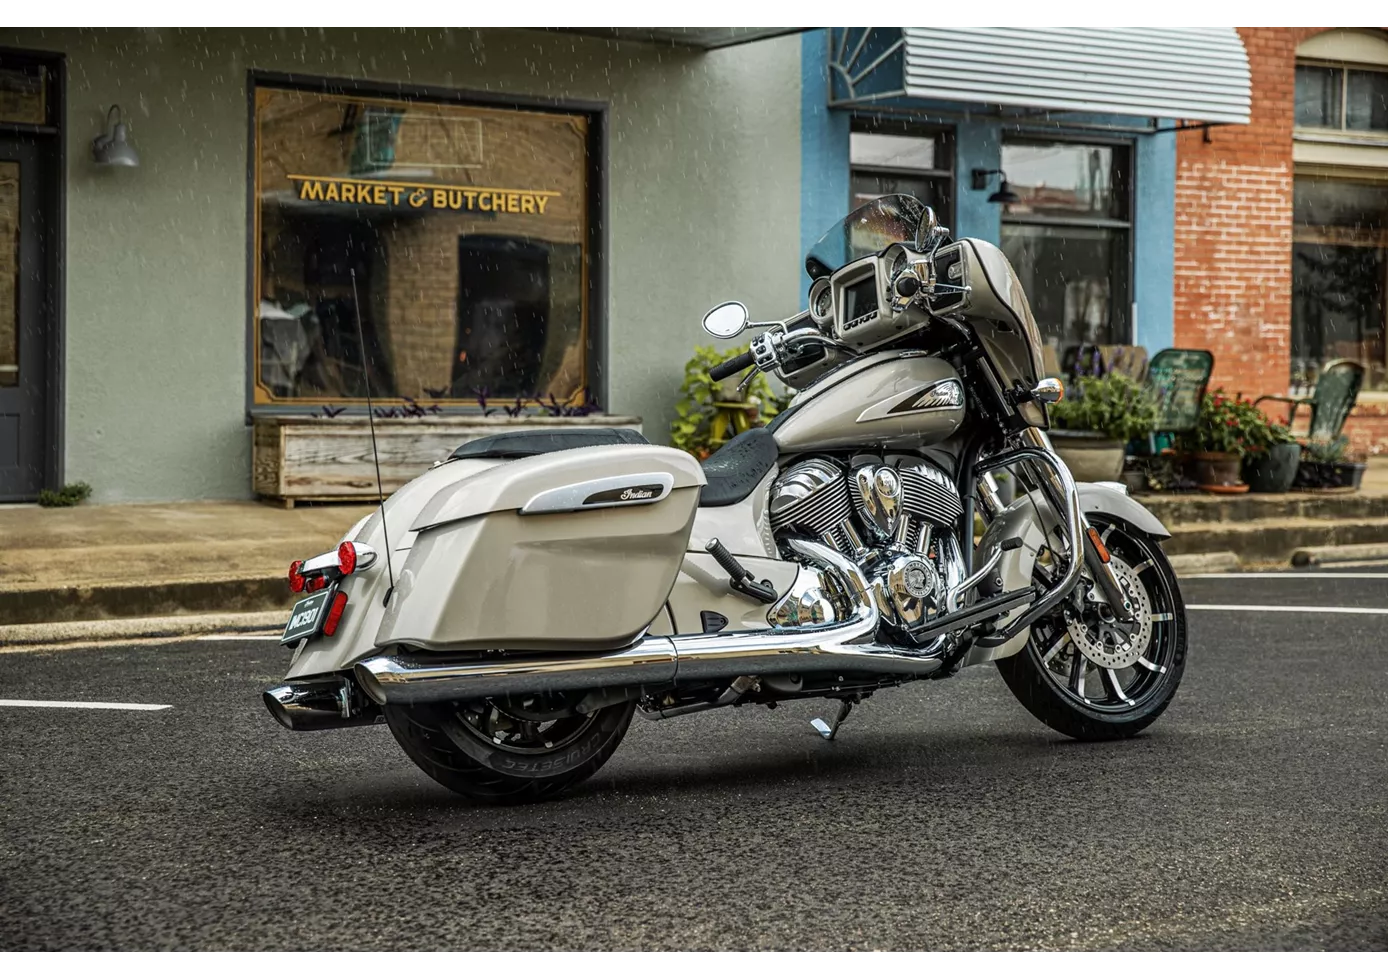 Indian Chieftain Limited 2022